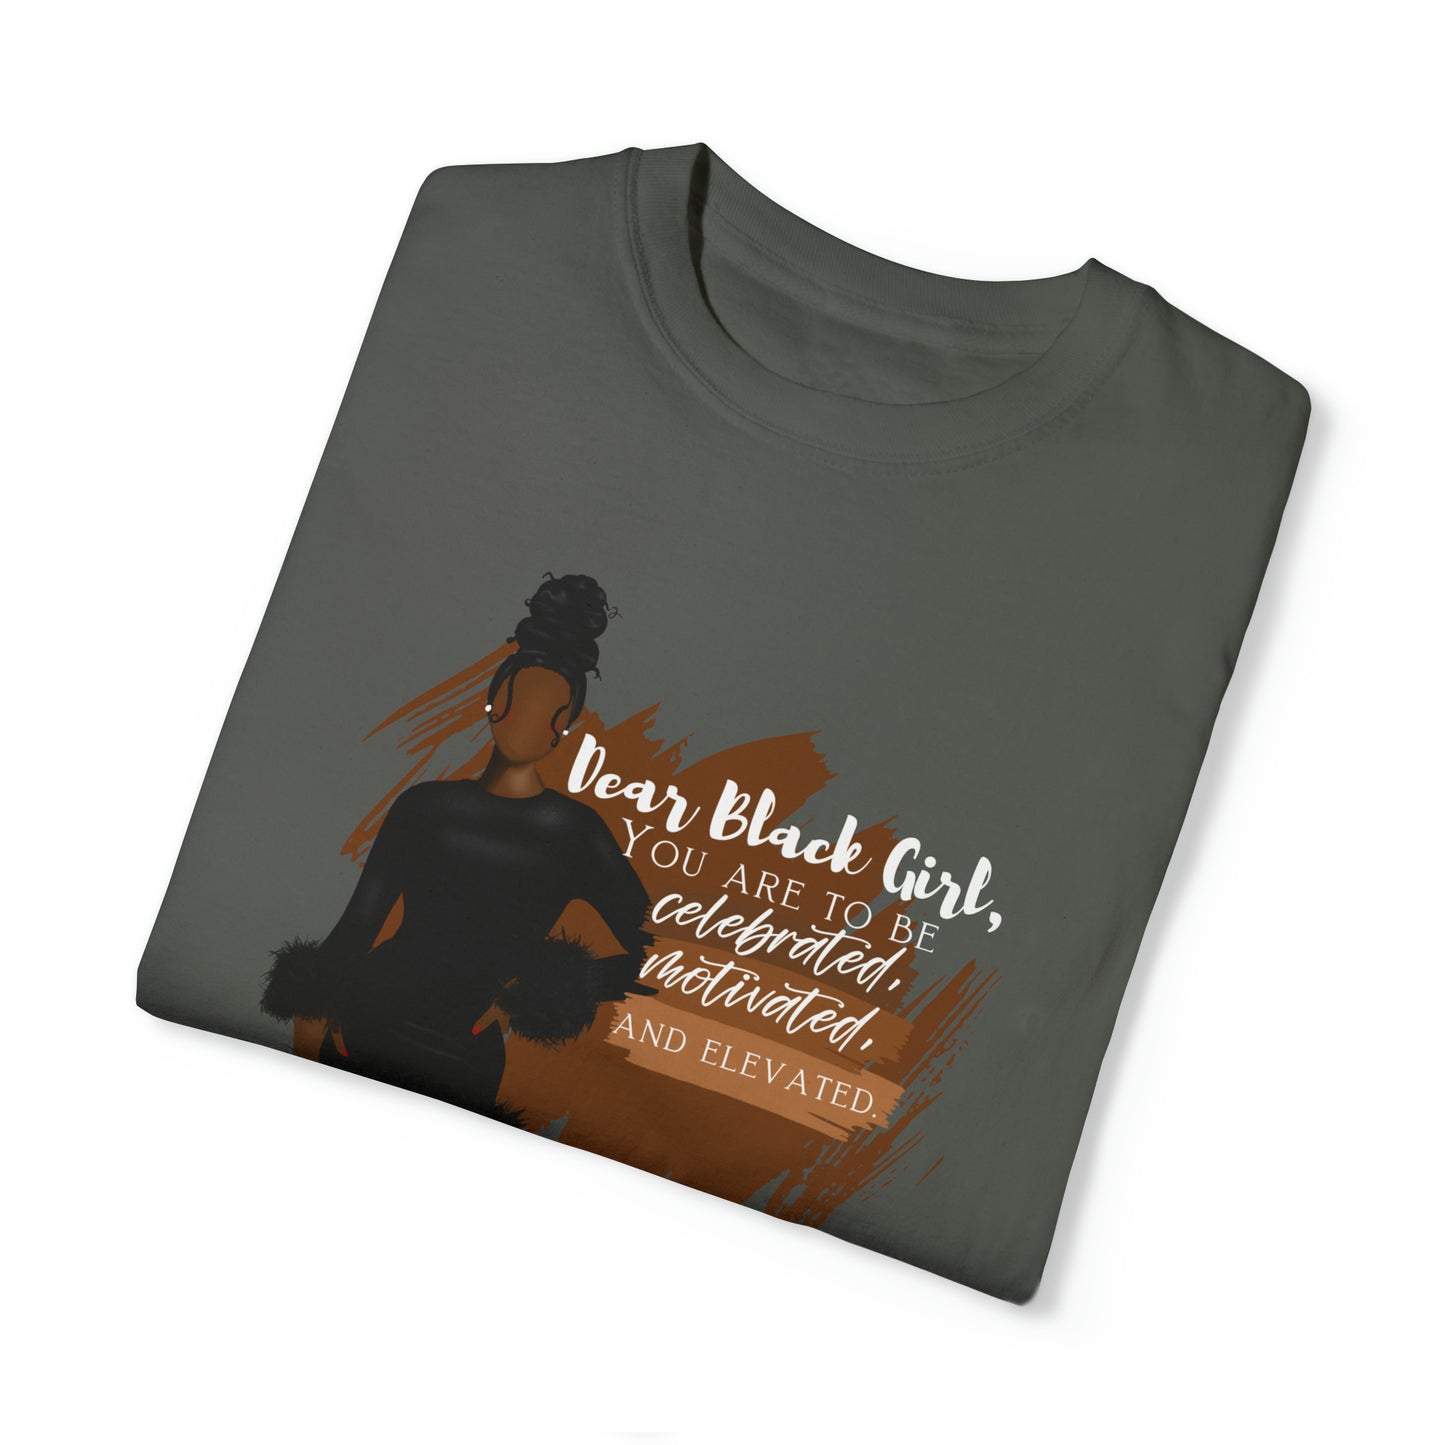 A powerful and affirming graphic tee that features the text 'Dear Black Girl' in bold letters against a backdrop of vibrant colors. The design exudes positivity and pride, celebrating the beauty, strength, and uniqueness of Black girls. An inspiring statement piece for embracing individuality and cultural identity